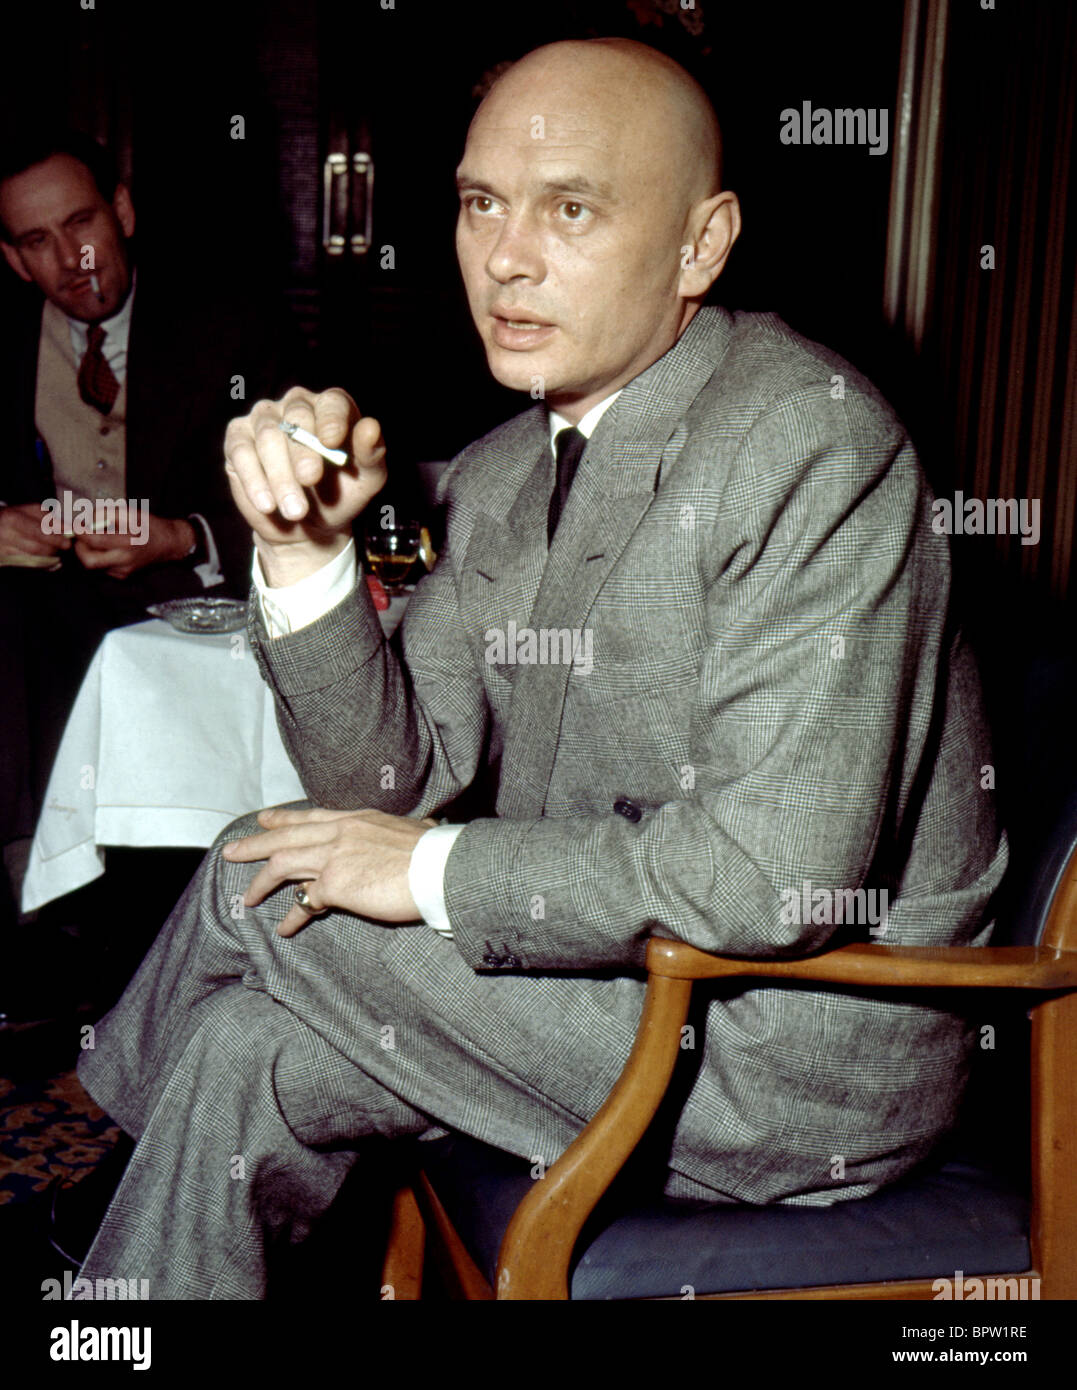 YUL BRYNNER ACTOR (1962) Stock Photo